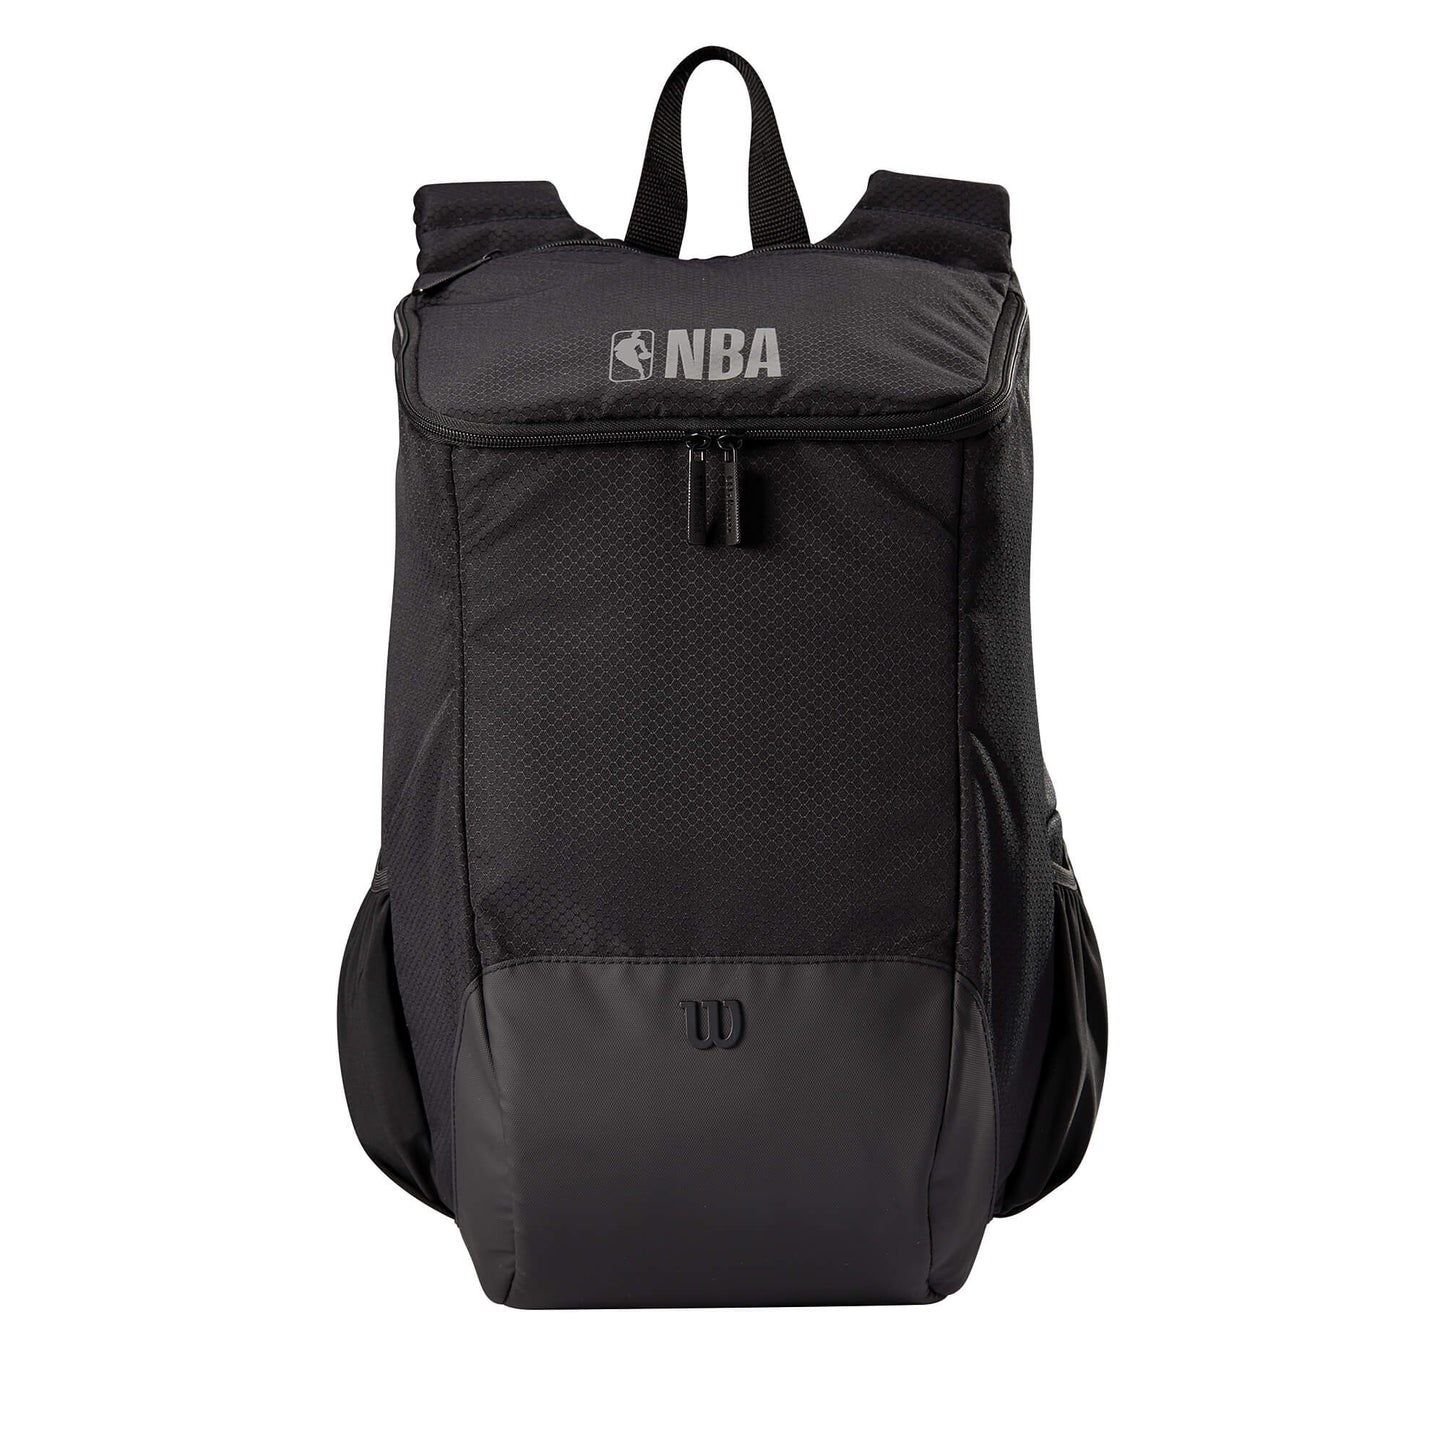 Wilson NBA Authentic Backpack